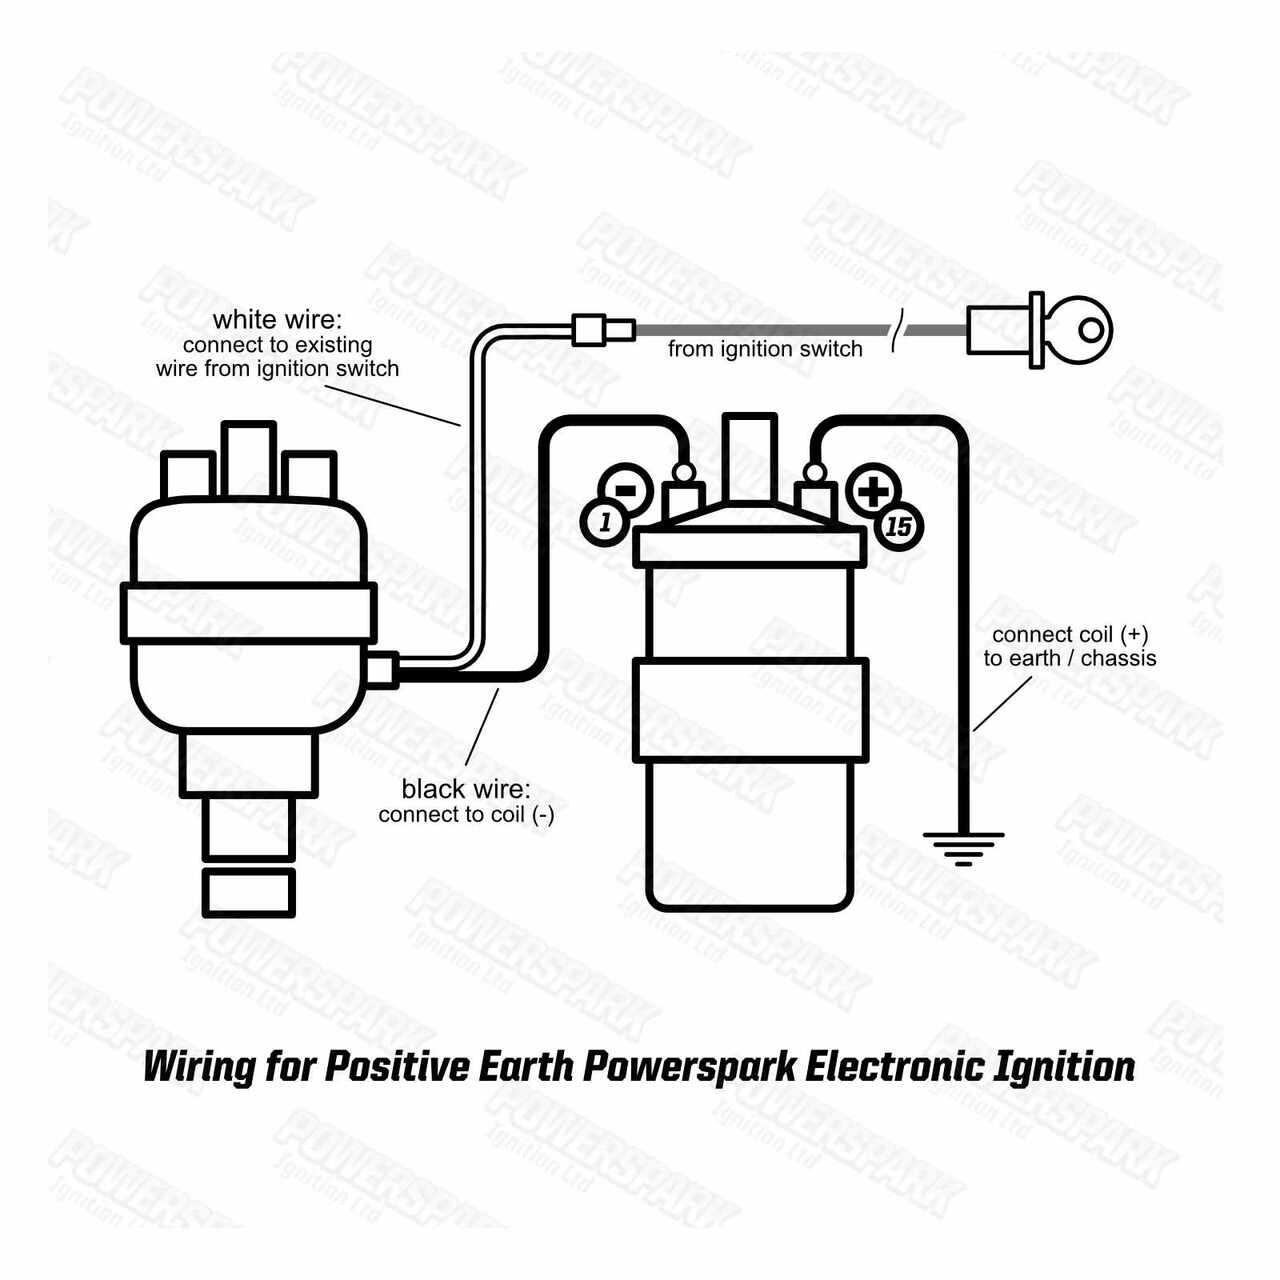 Powerspark Electronic Ignition Kit for Lucas 22D6 and 25D6 Distributor Positive Earth K1PP and R4 wiring diagram